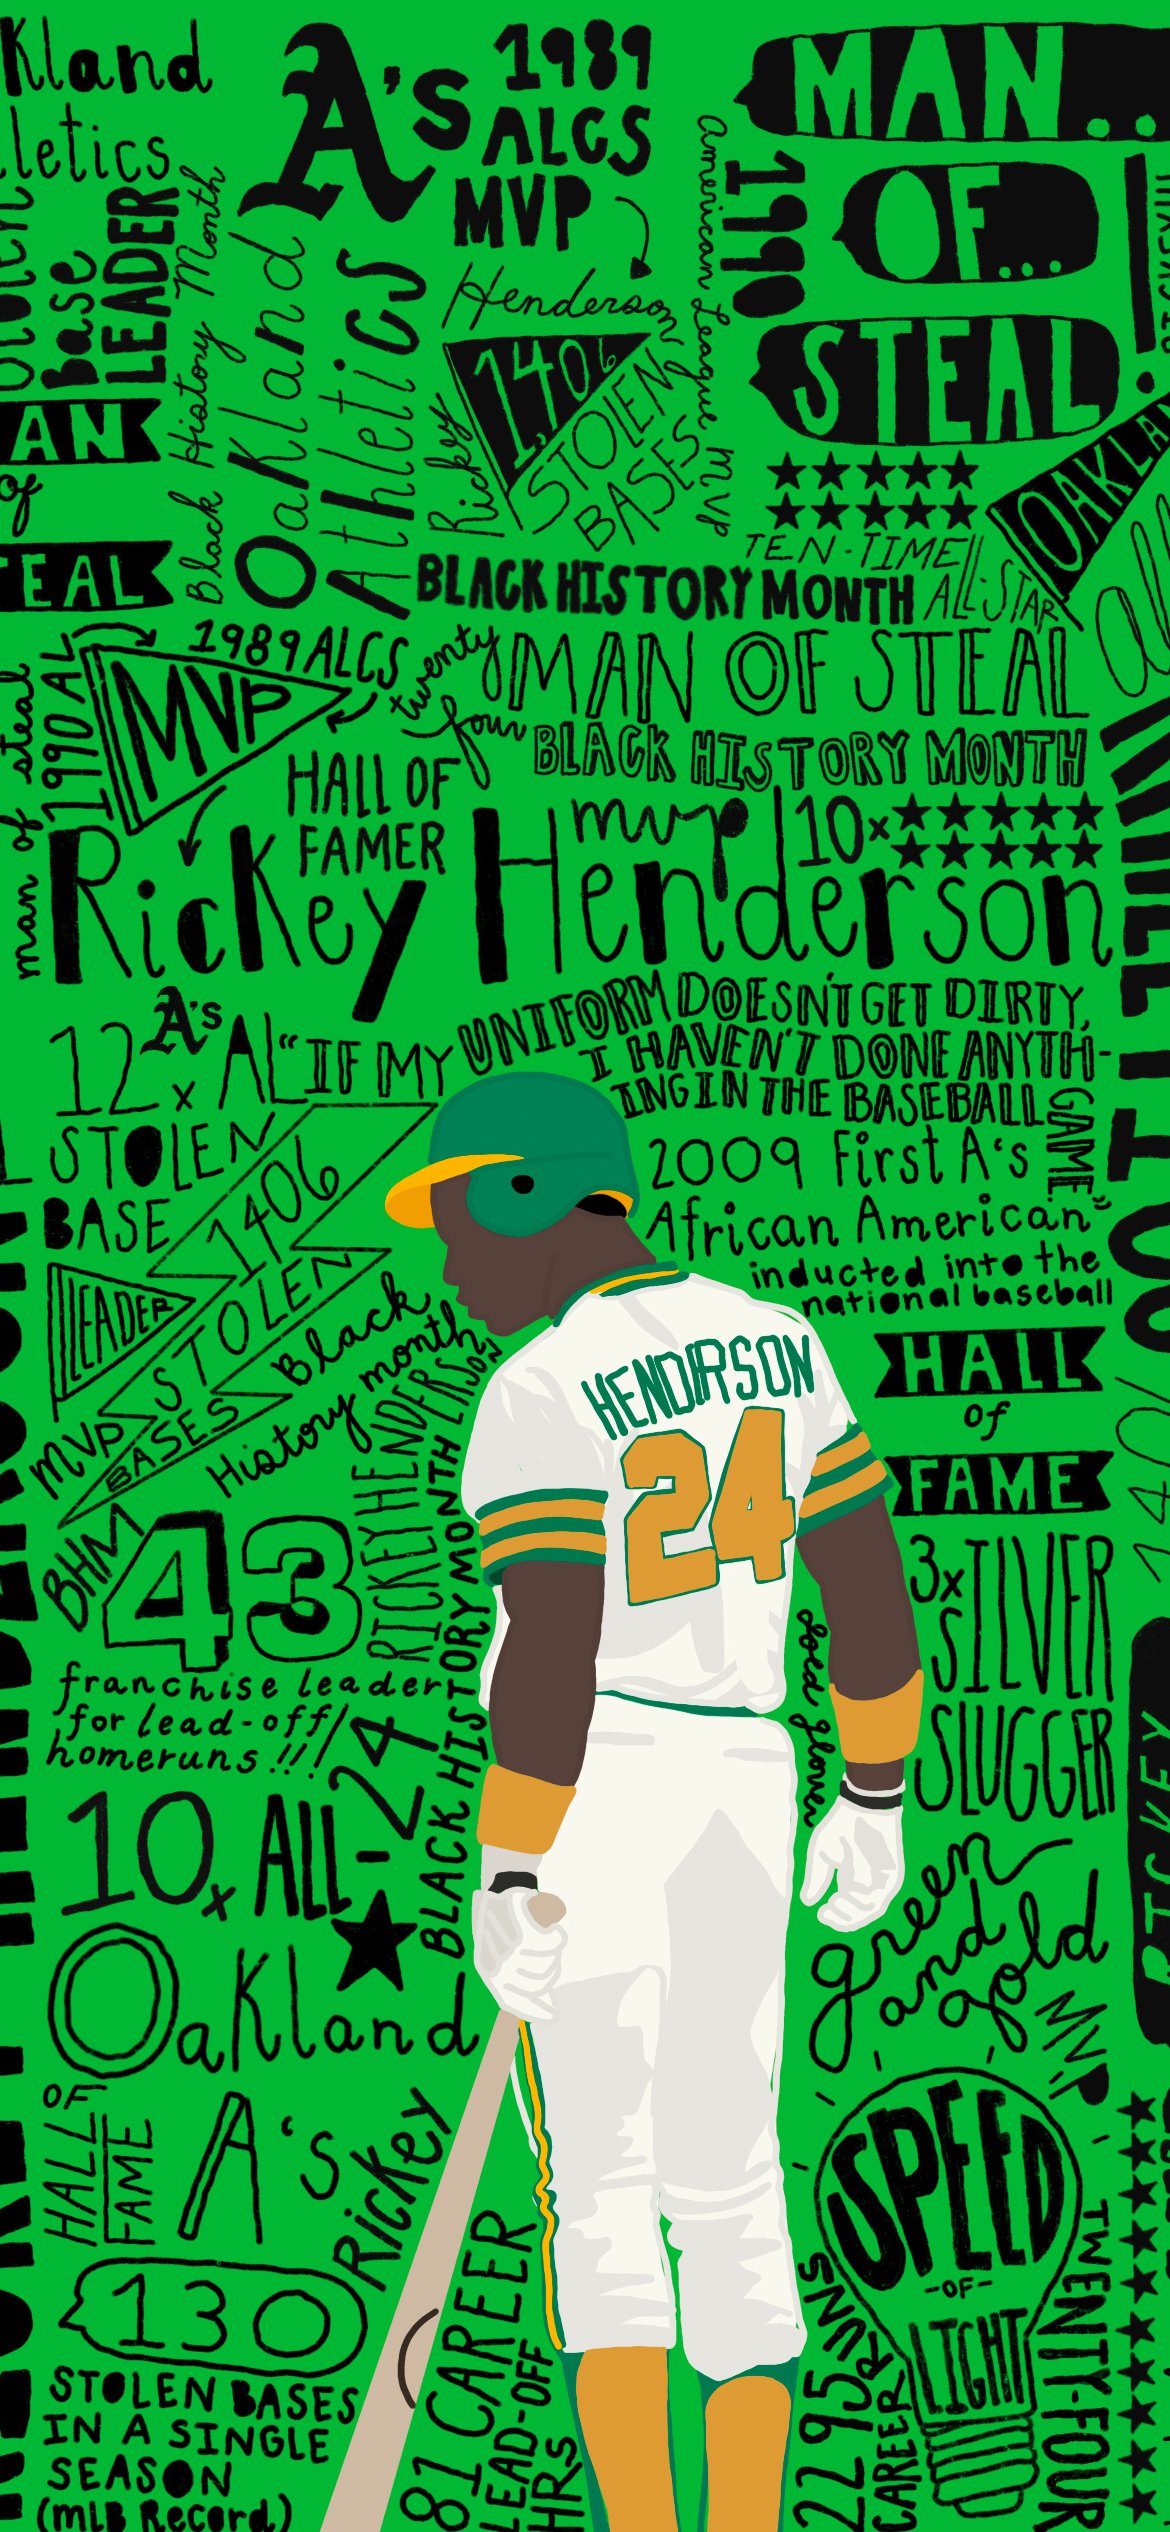 Rickey Henderson wallpaper by Pitin2017 - Download on ZEDGE™